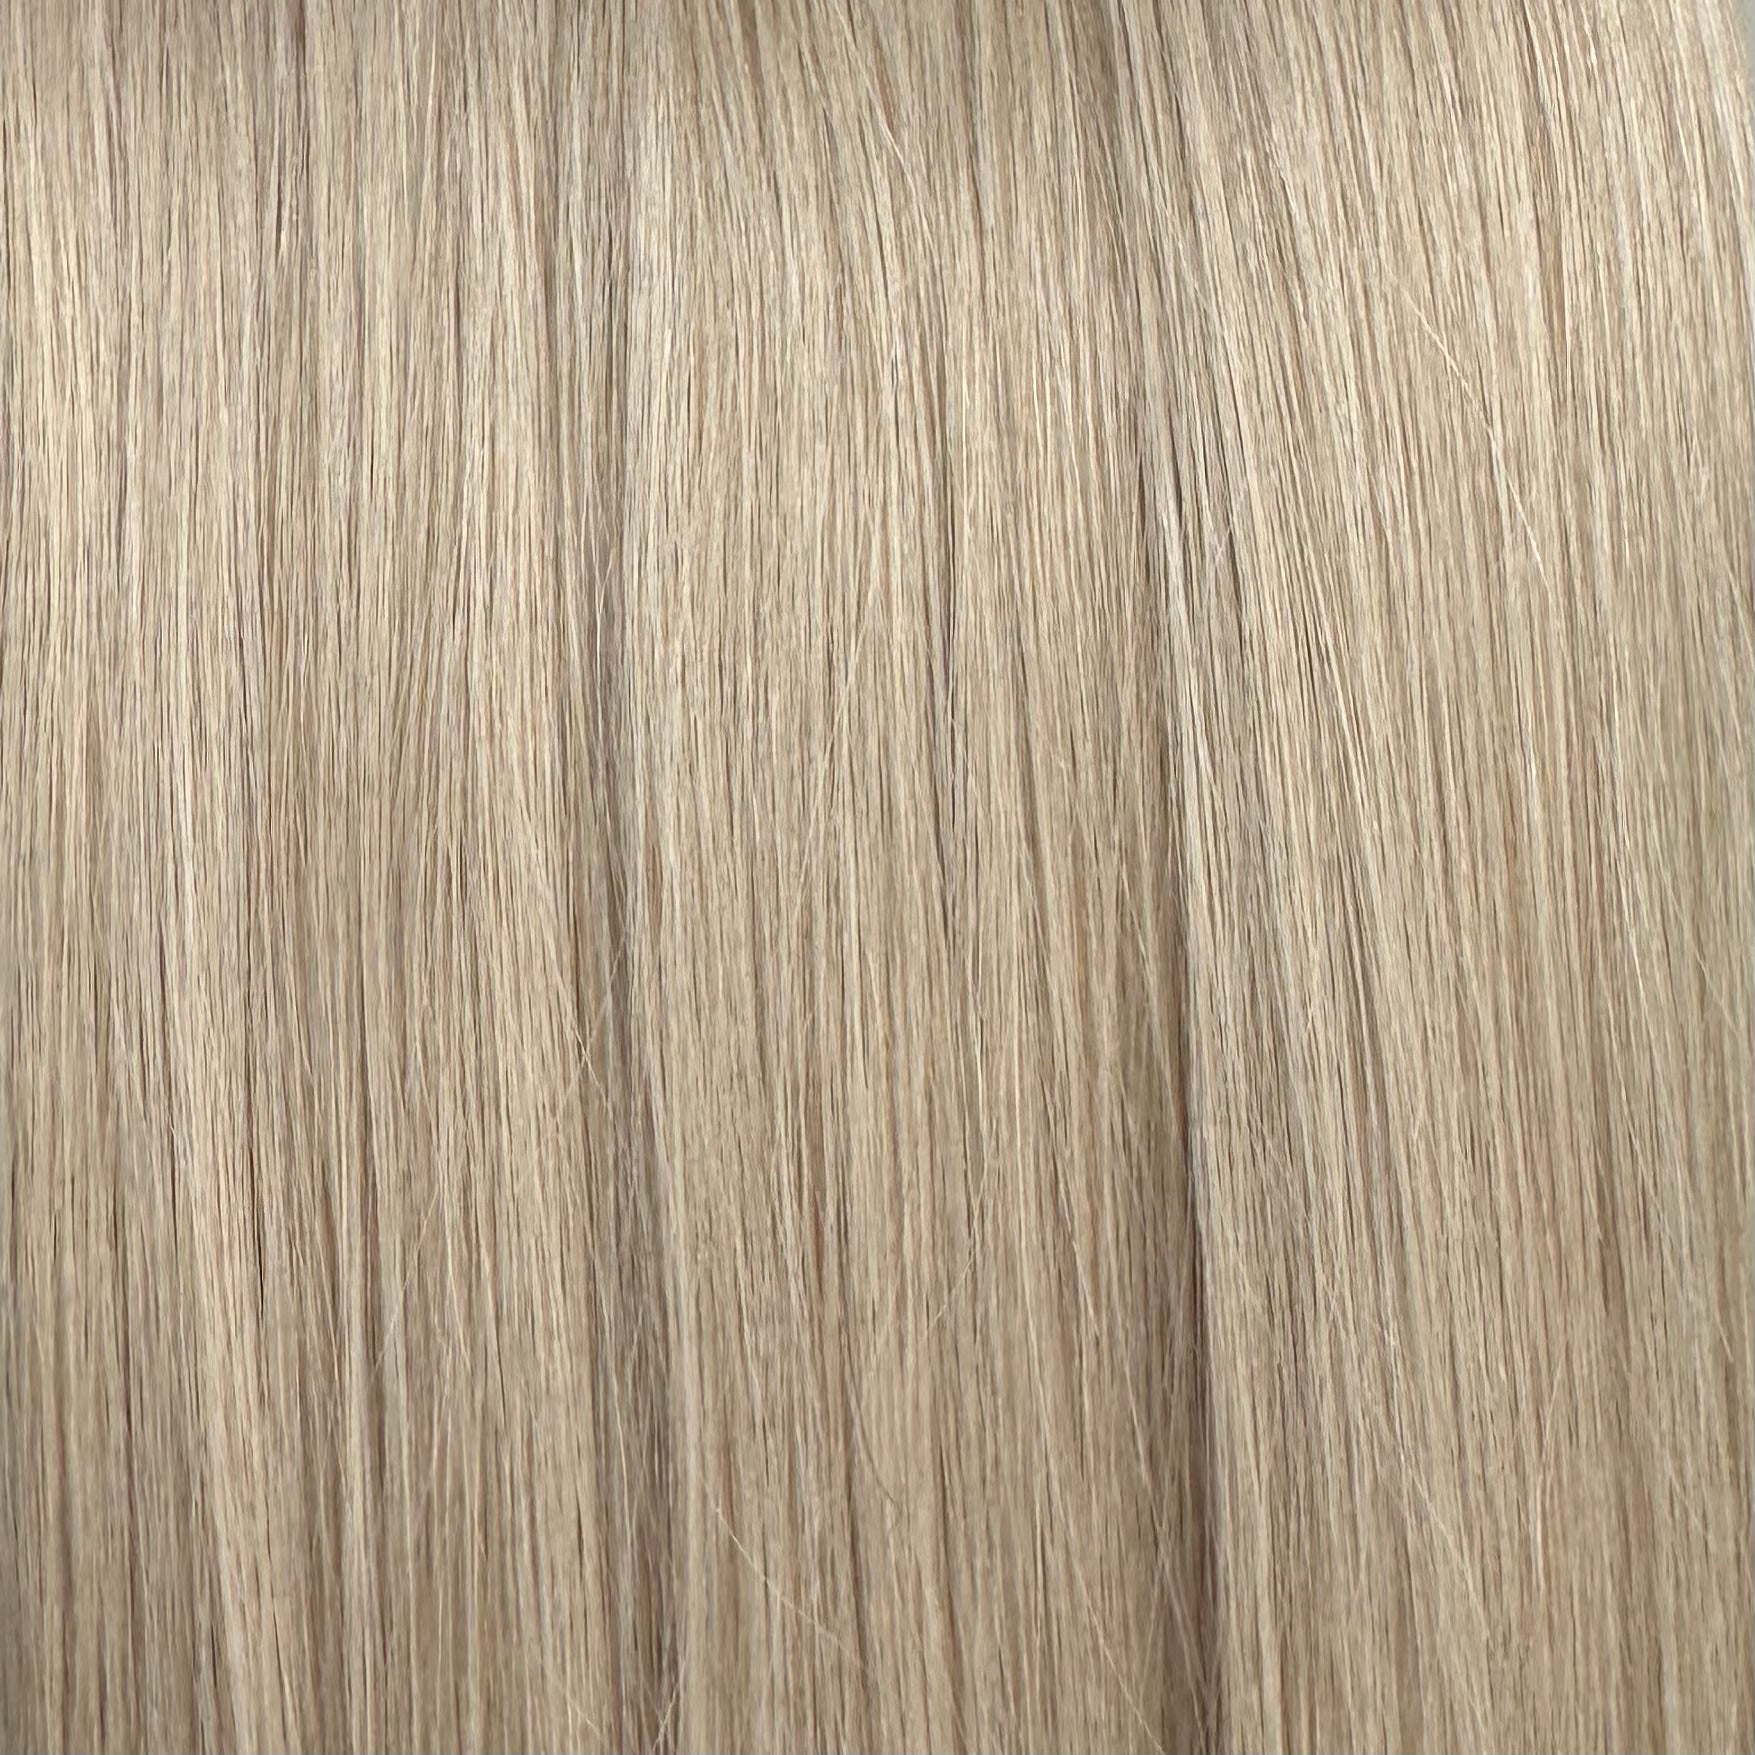 Pearl Blonde - InterMix Wefts